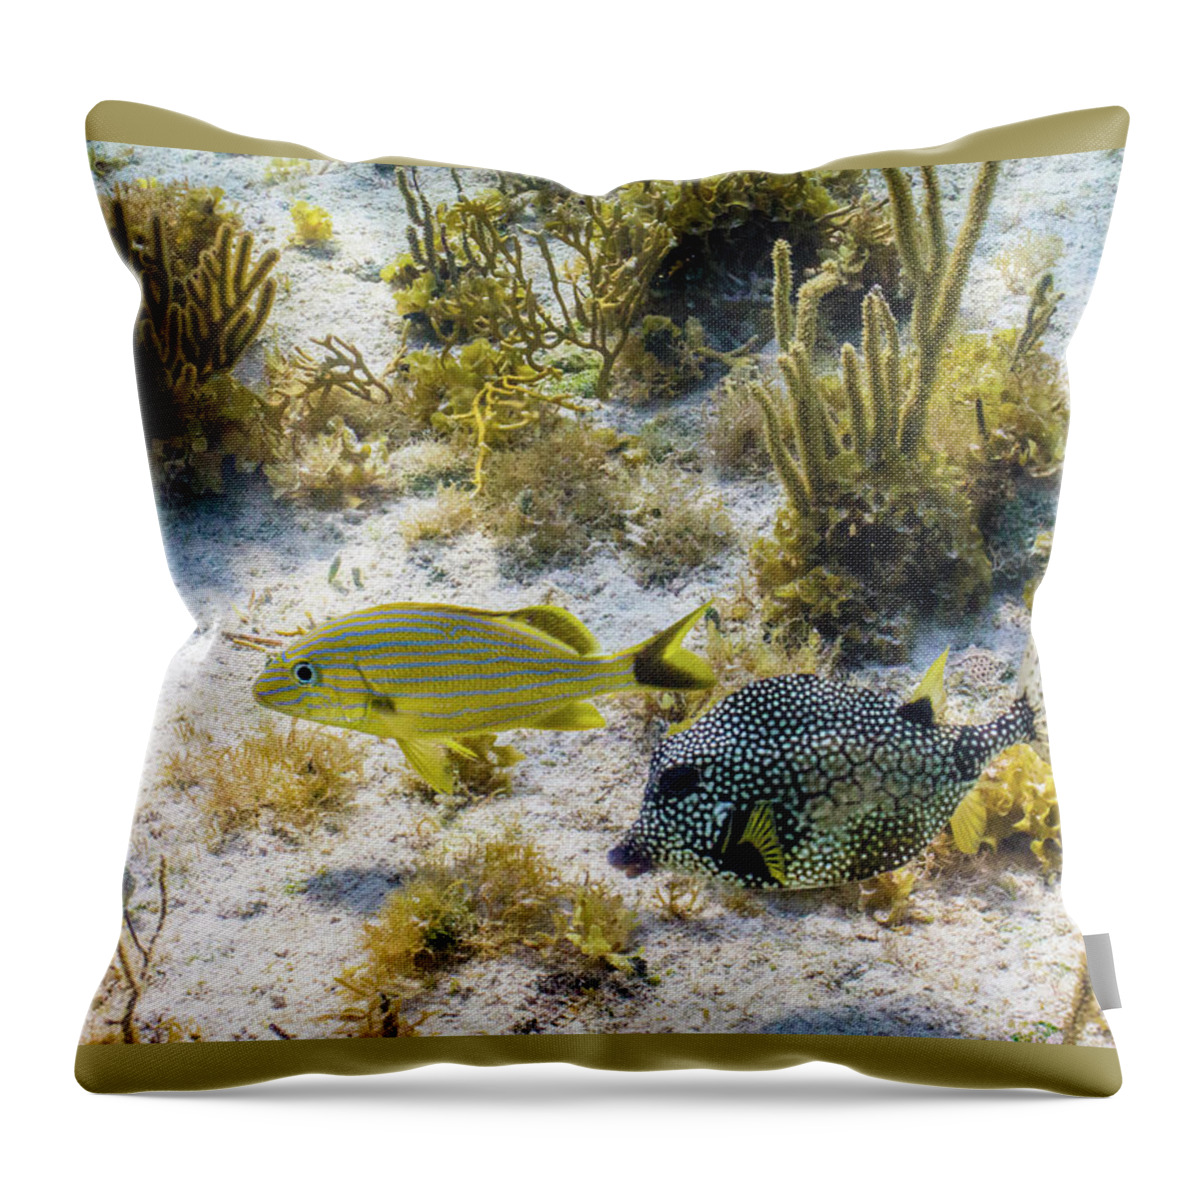 Animals Throw Pillow featuring the photograph The Odd Couple by Lynne Browne